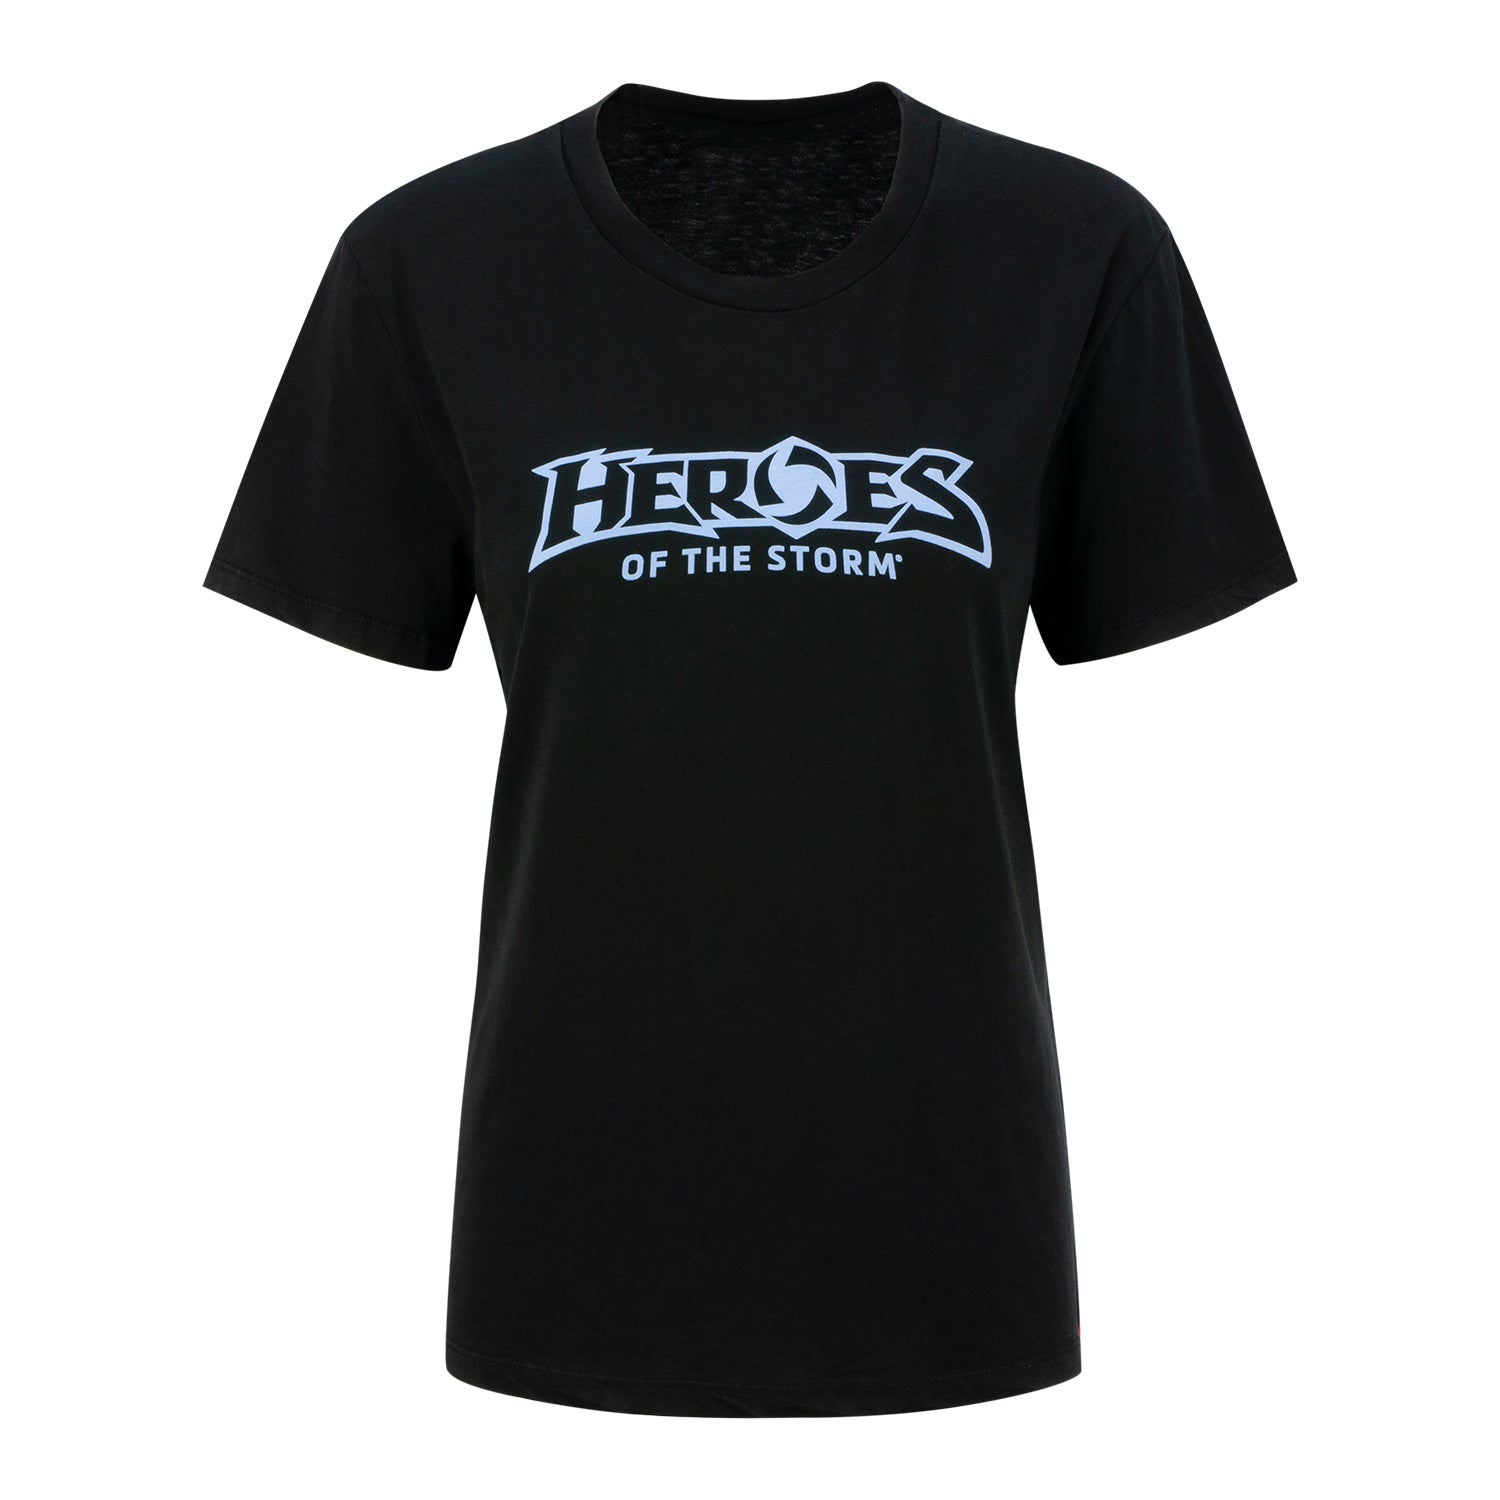 Heroes of the Storm Women's Black T-Shirt - Front View with Heroes of the Storm Logo